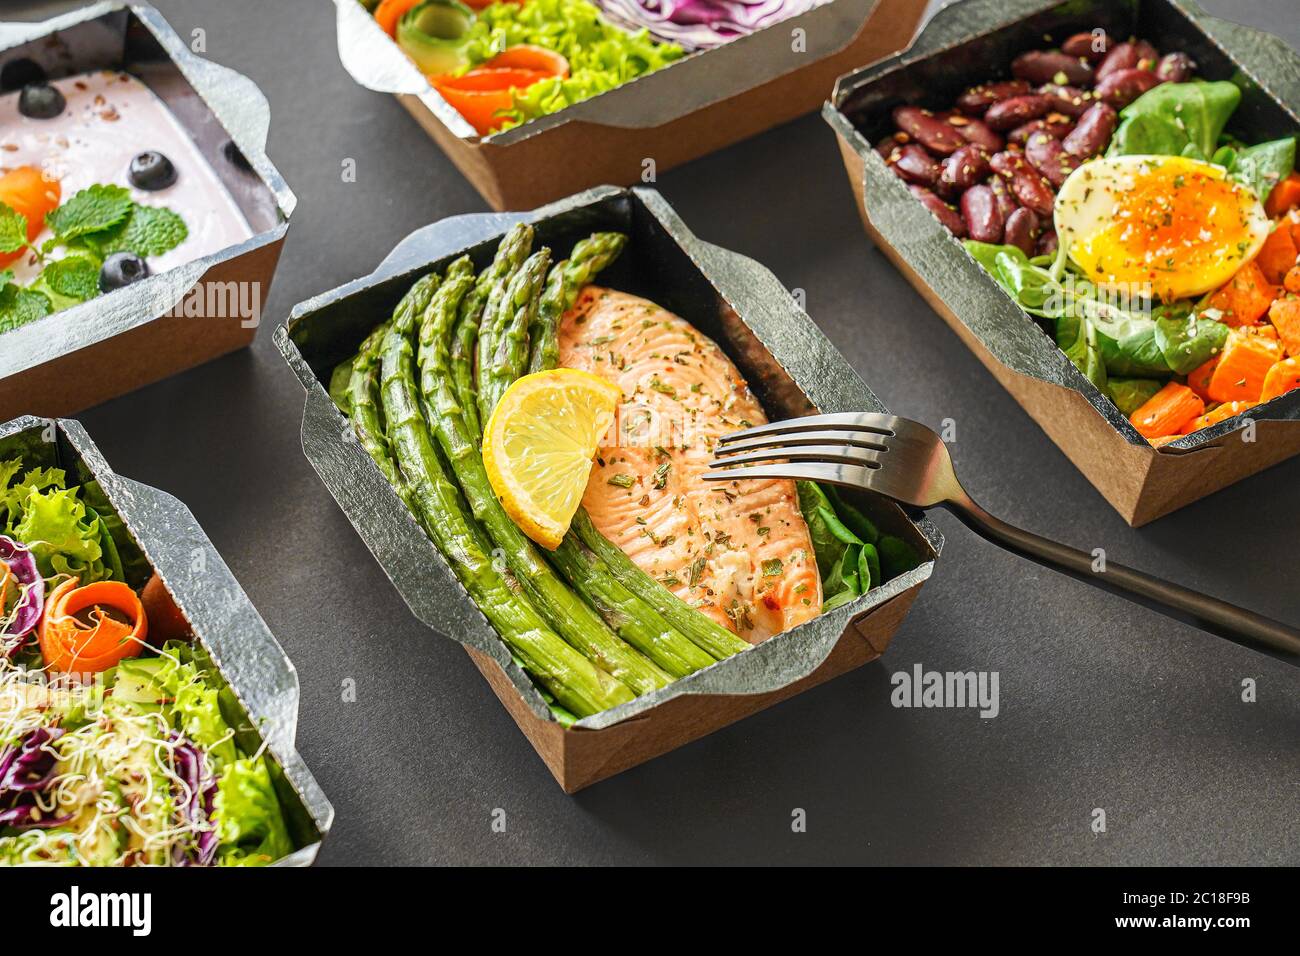 Ready healthy food menu meal delivery take away  boxes on black background. Stock Photo